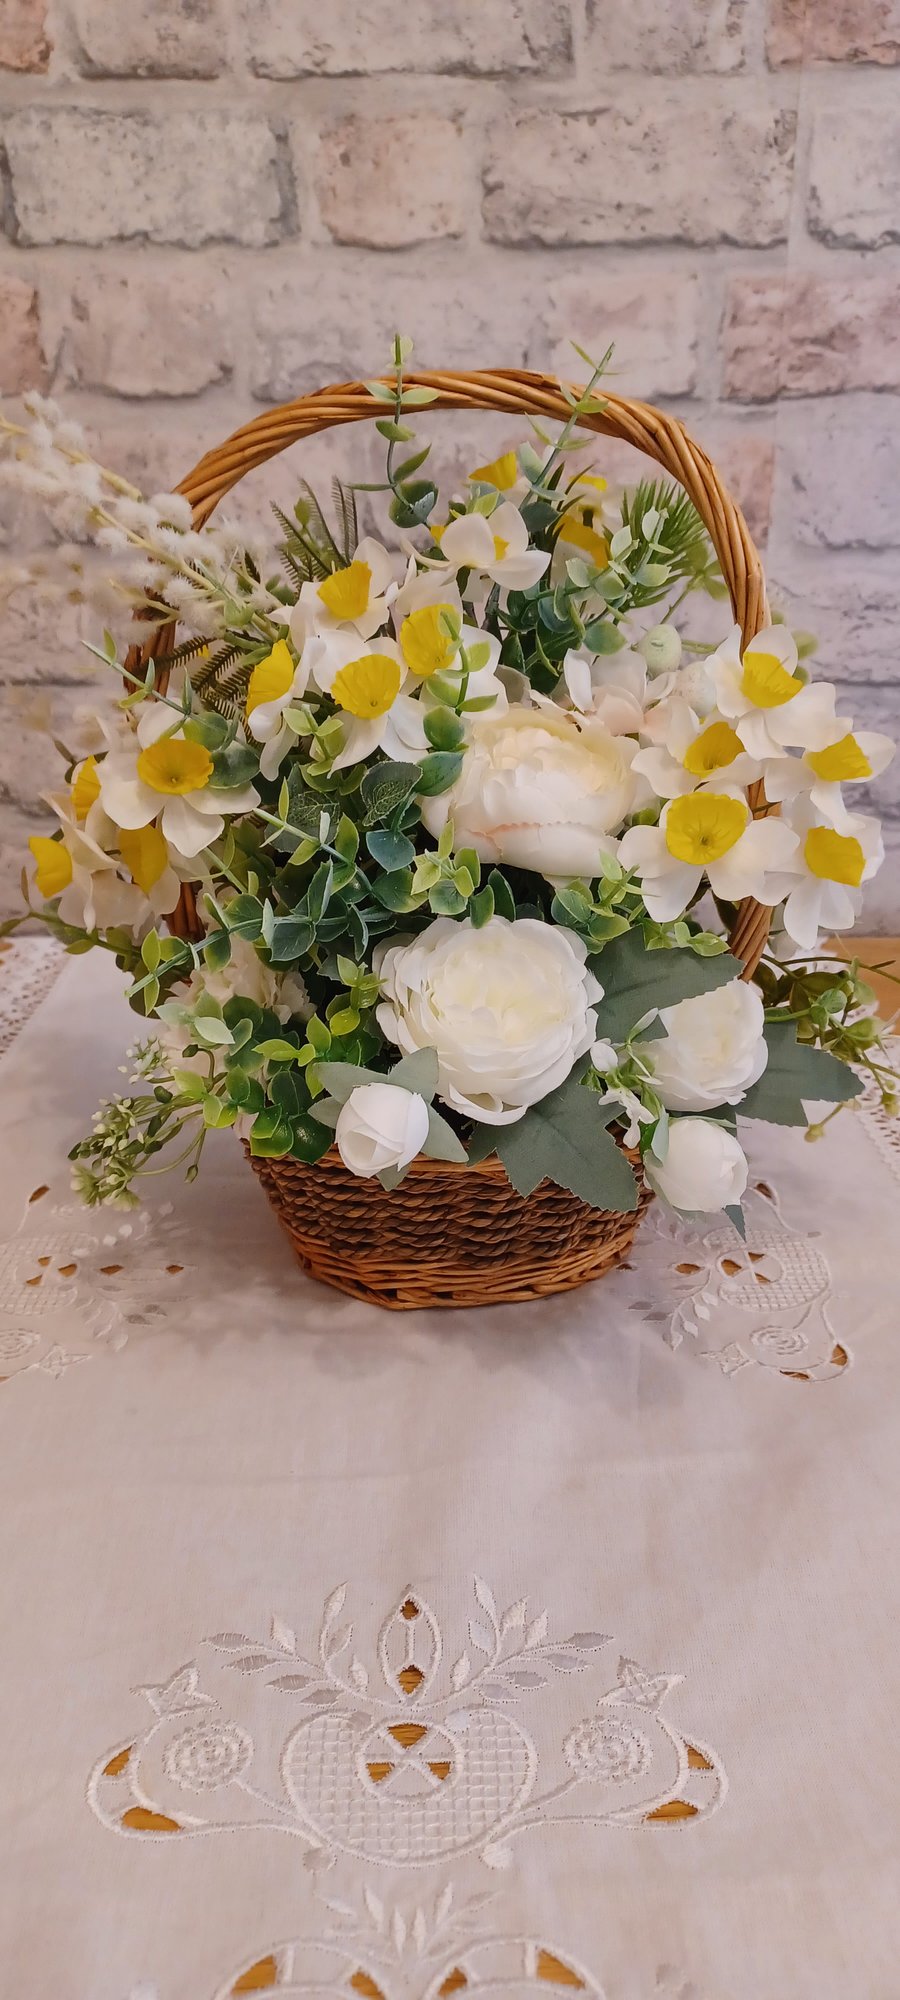 Vintage basket of daffodils and roses